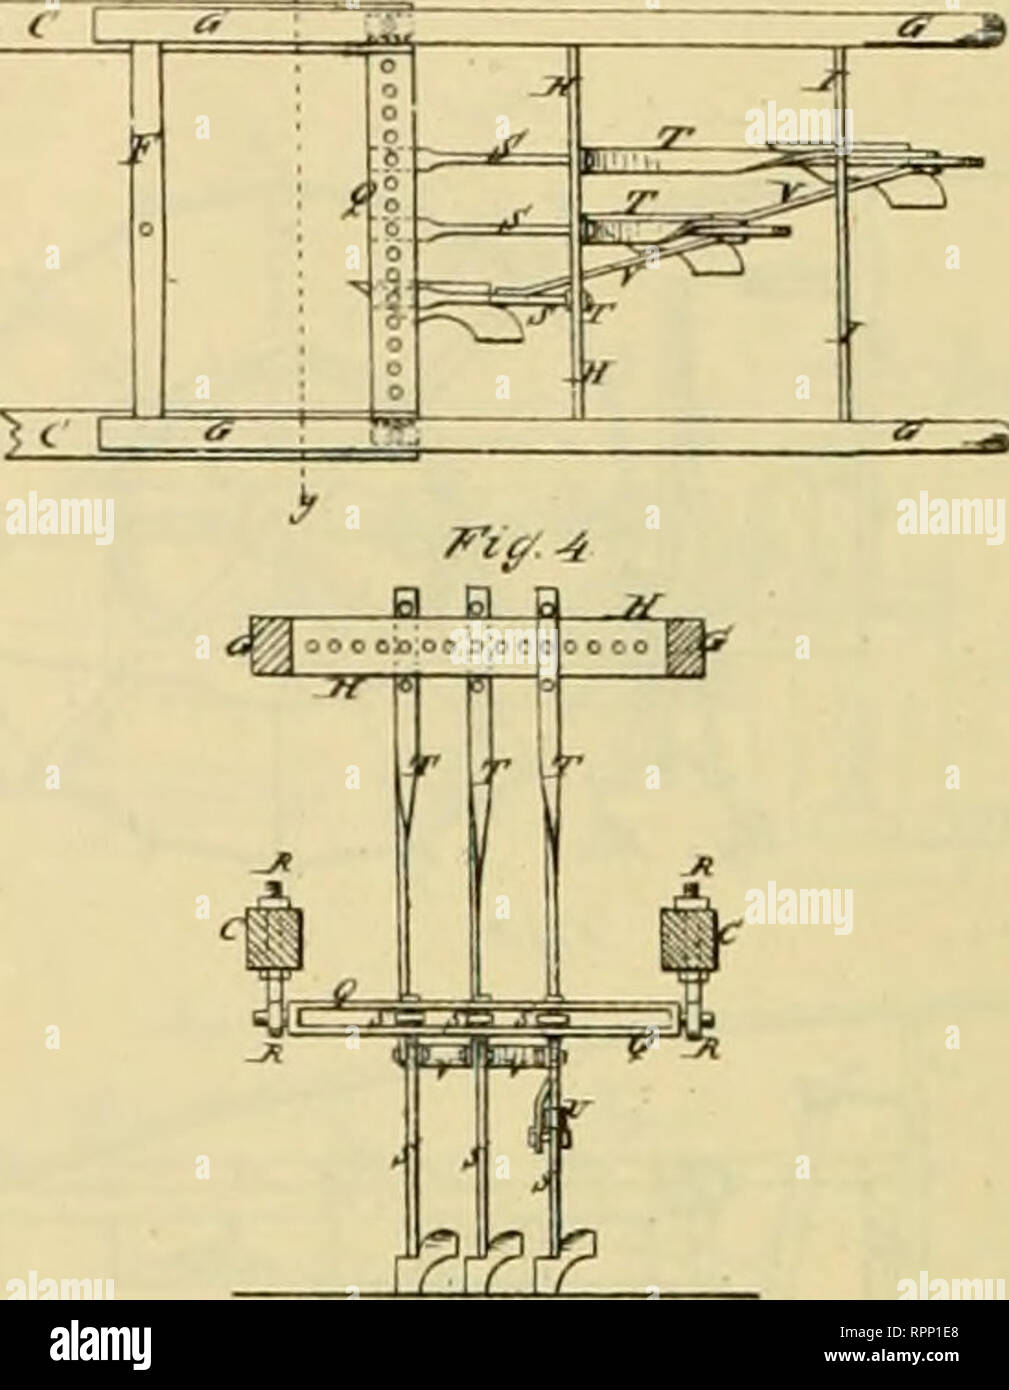 . Allen's digest of plows, with attachments, patented in the United States from A.D. 1789 to January 1883 ... Plows; Patents. Wiinessos: ^ Per , Inventor: Attorneys. 2 Sheeti--Shen 2. J. I. WATROUS Combined Gang-Plows. Cultivators, and Choppers. No.148,157. Pilfiled Mirch 3. 187! J, JfigfJ. ji^.j-. Witnesses: ^^ '^'^^ Per Inventor: Anomeys. T. E. MARABIE. Cotton-Choppers. Nn.149.492. Patented April ?, 1874. £. H. SUTTON. Cotloo-Cultivators. No.149,543, Patented April 7, 1874. Please note that these images are extracted from scanned page images that may have been digitally enhanced for readabil Stock Photo